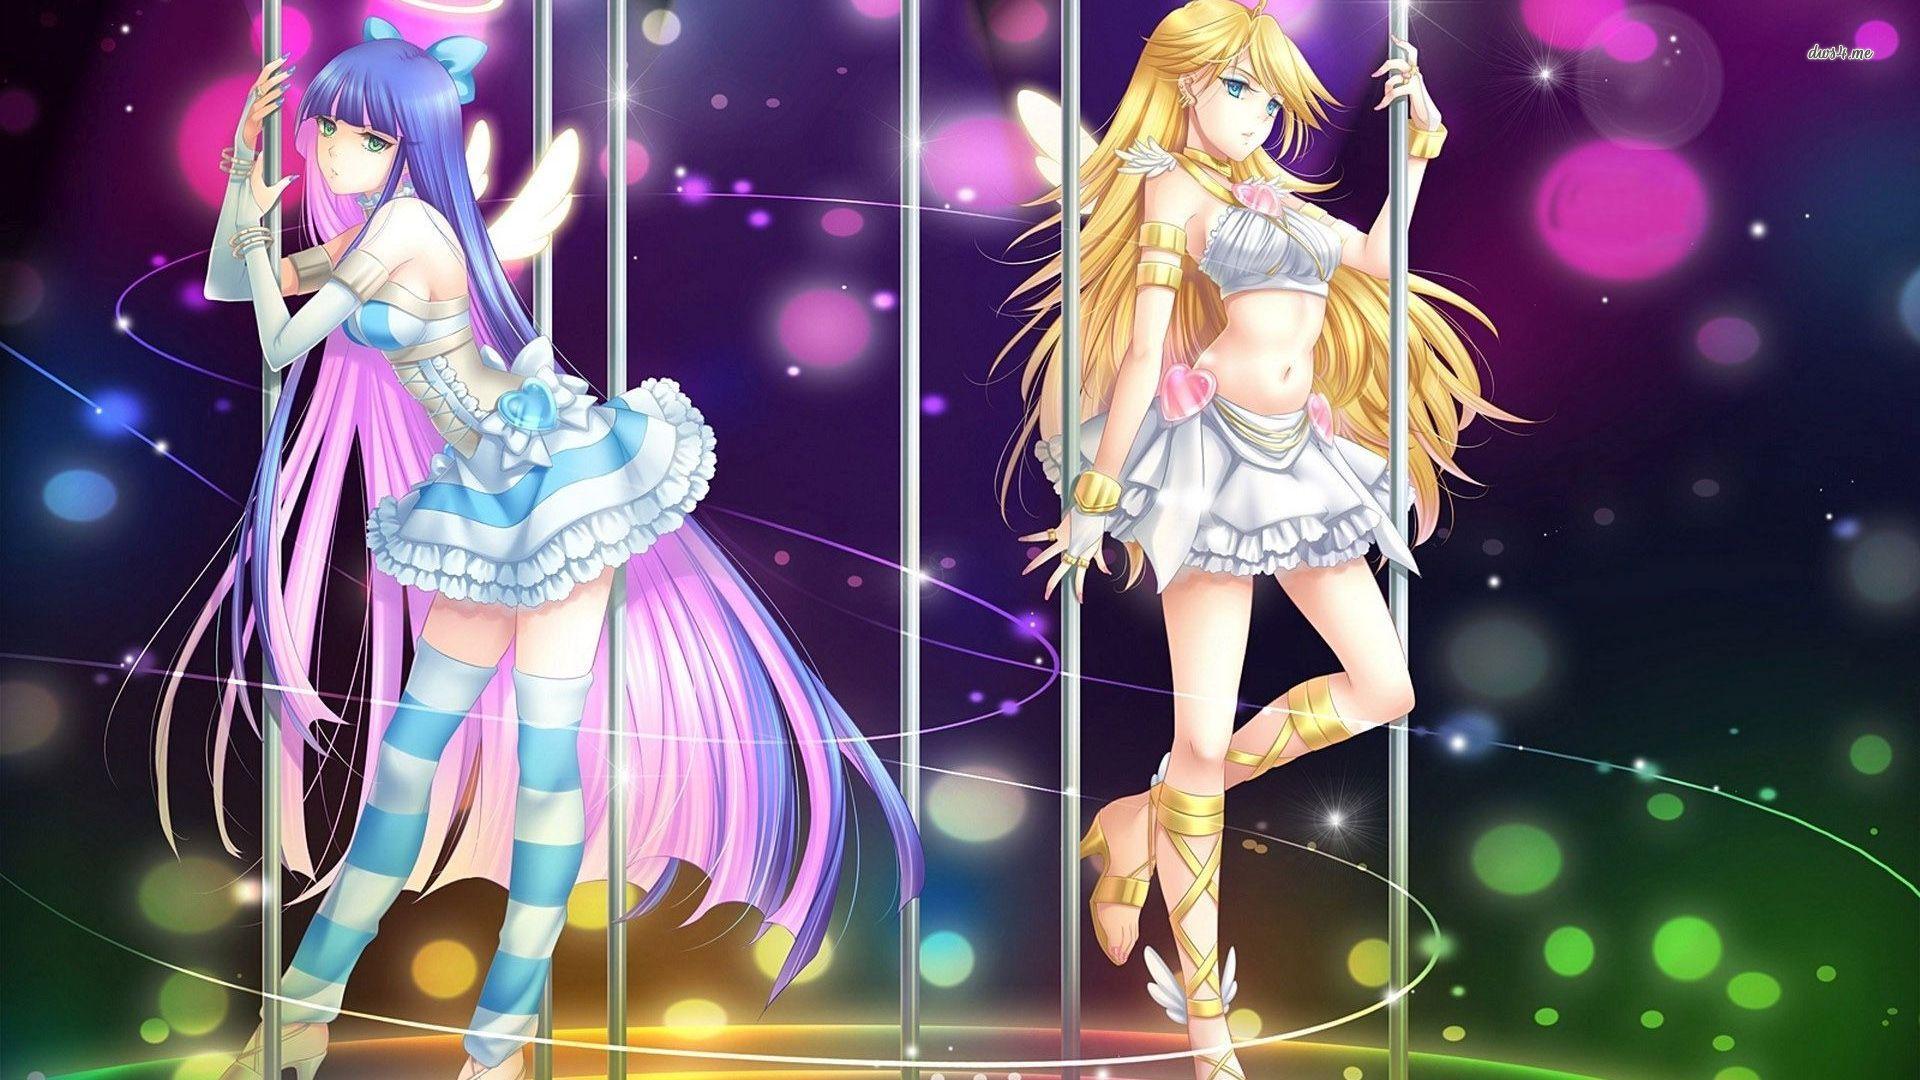 Panty and Stocking & Stocking with Garterbelt